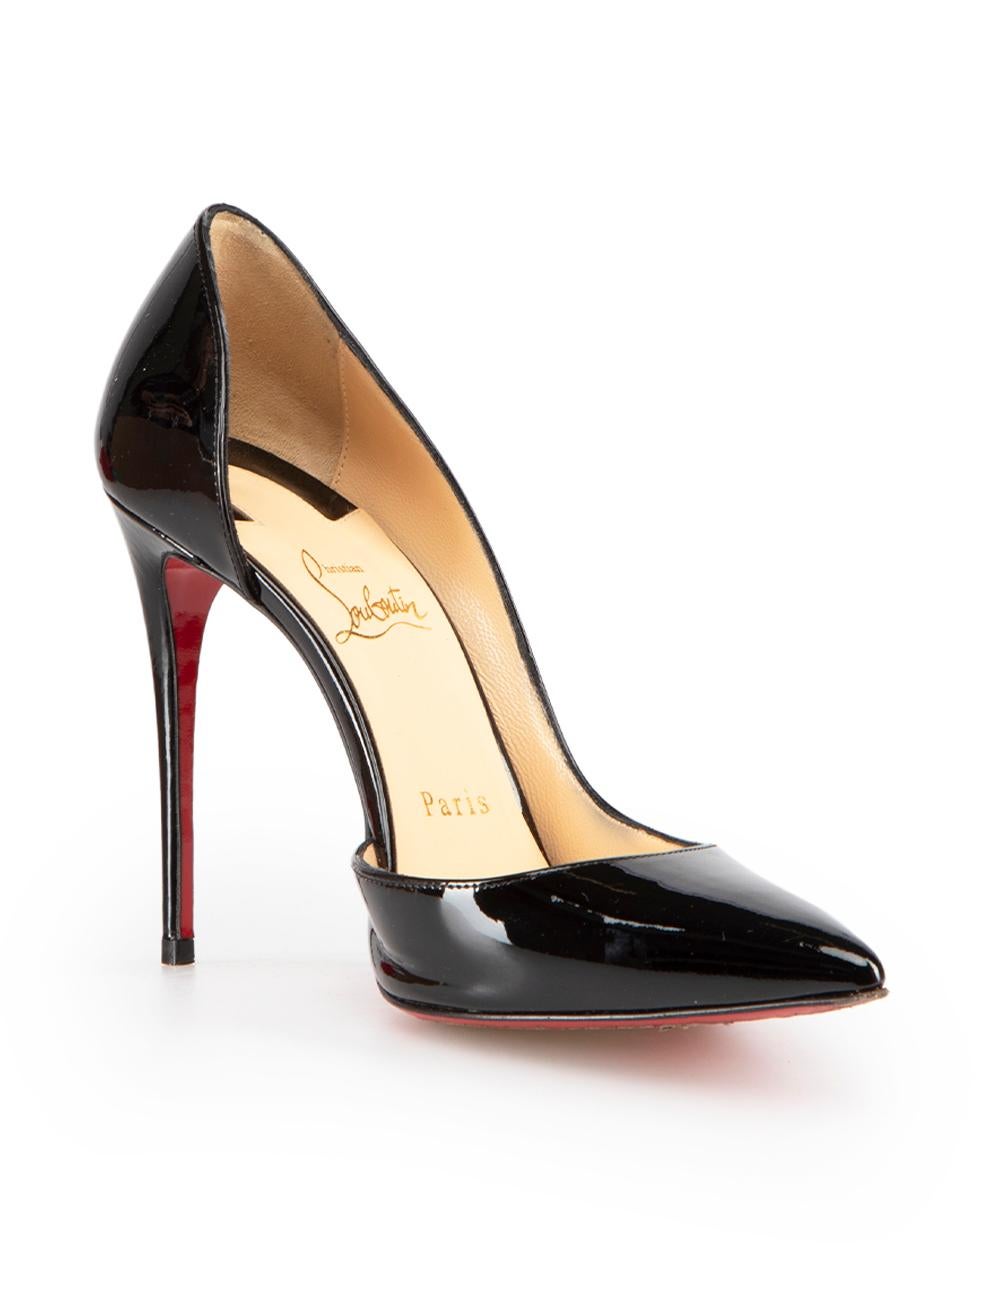 CONDITION is Very good. Minimal wear to shoes is evident. Minimal wear to the right-side of the right shoe with a faint scratch to the leather on this used Christian Louboutin designer resale item. These shoes come with original box and dust bags.
